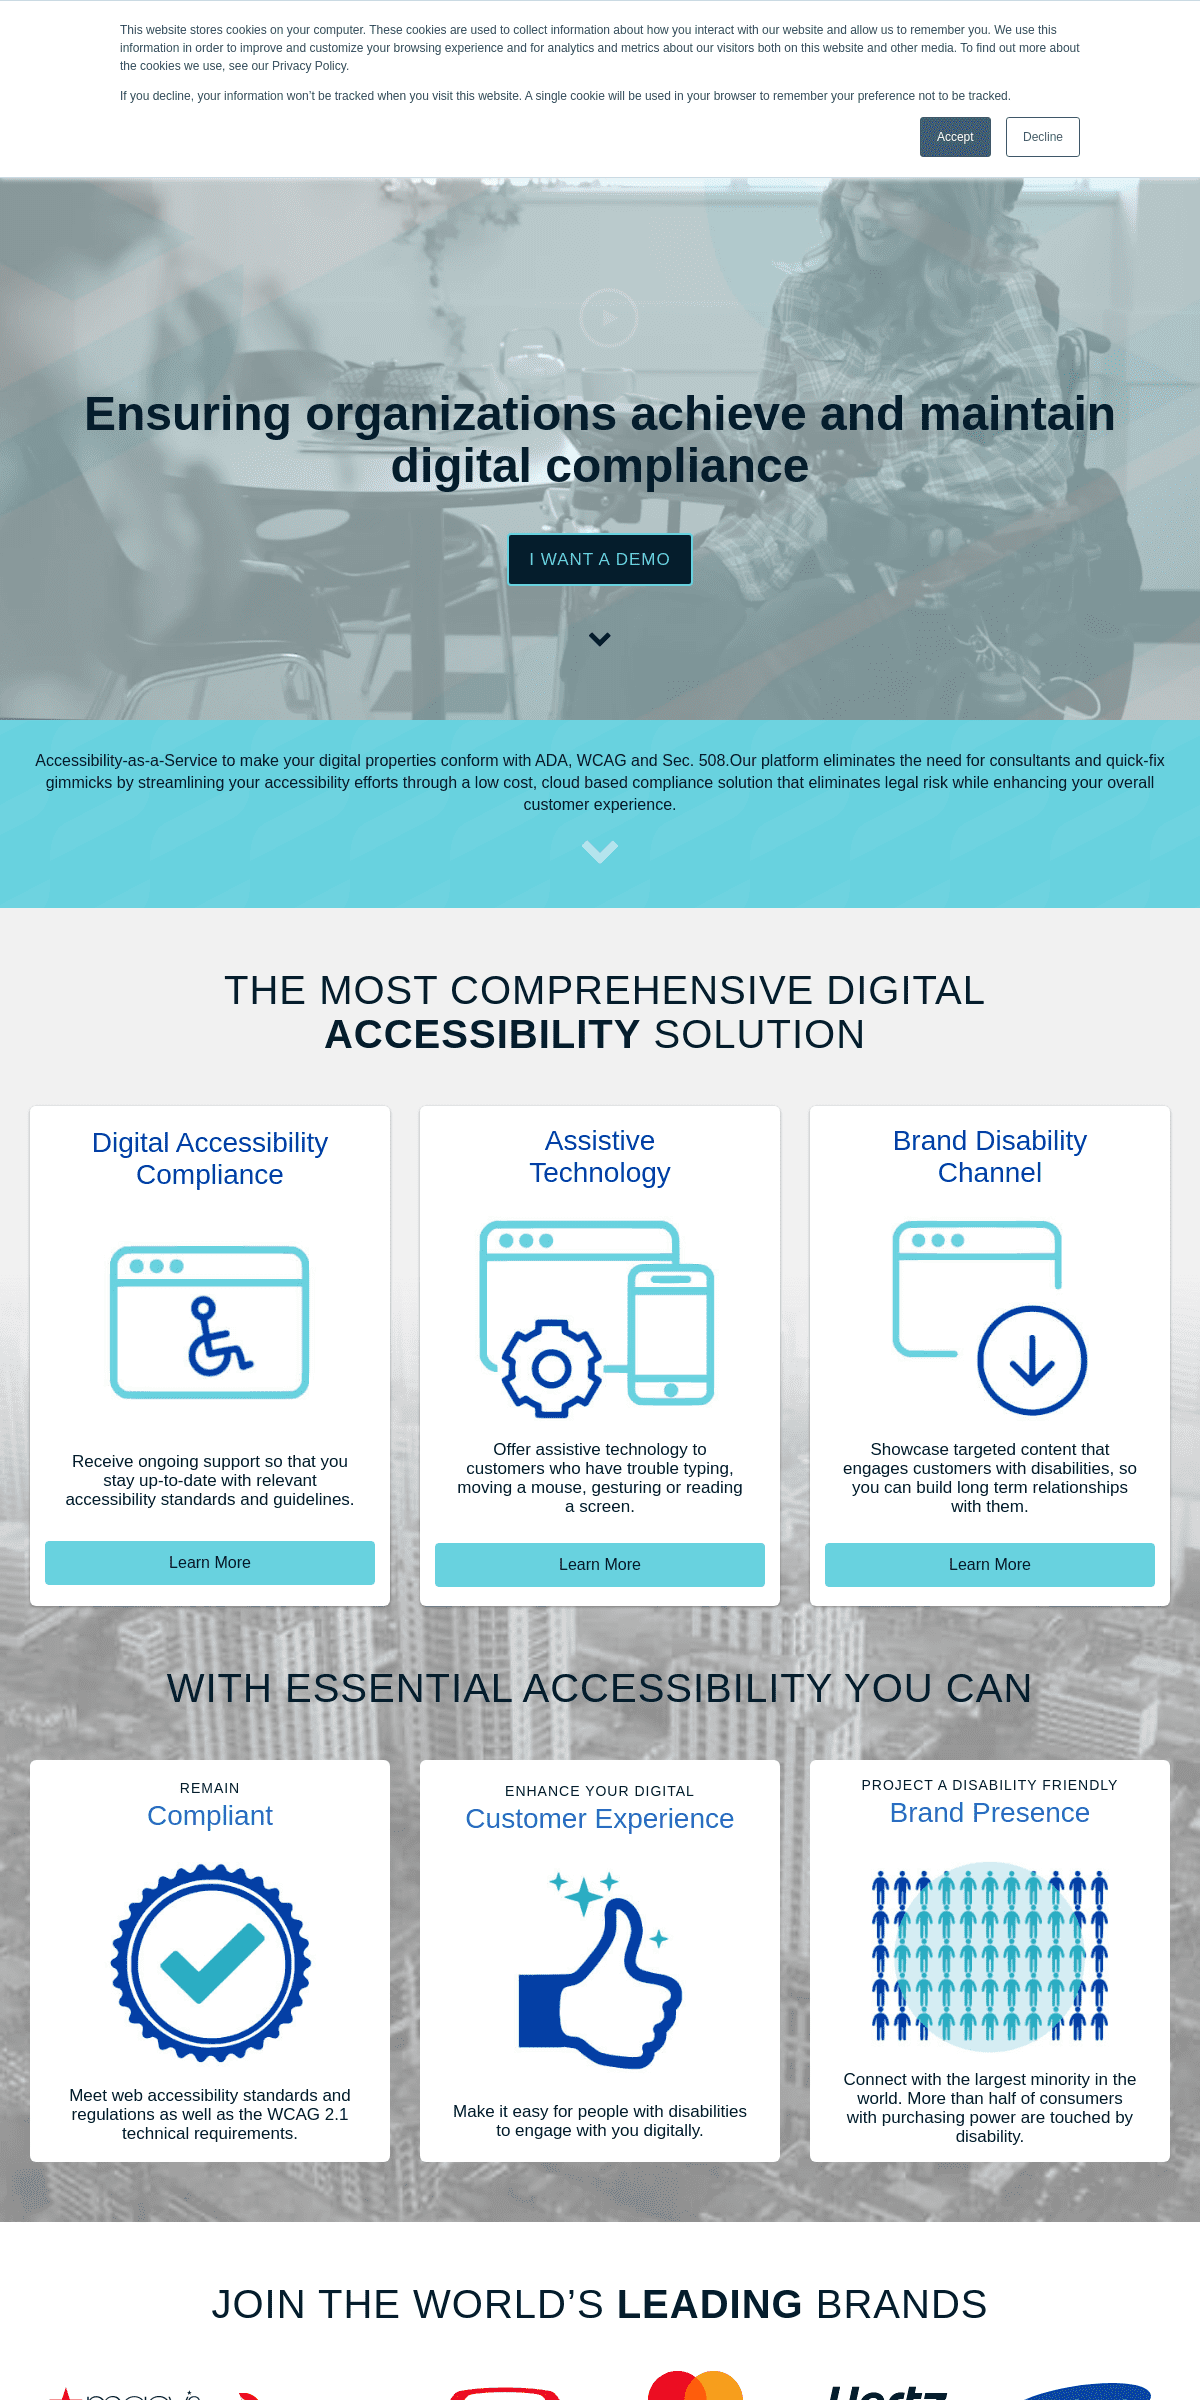 A complete backup of essentialaccessibility.com